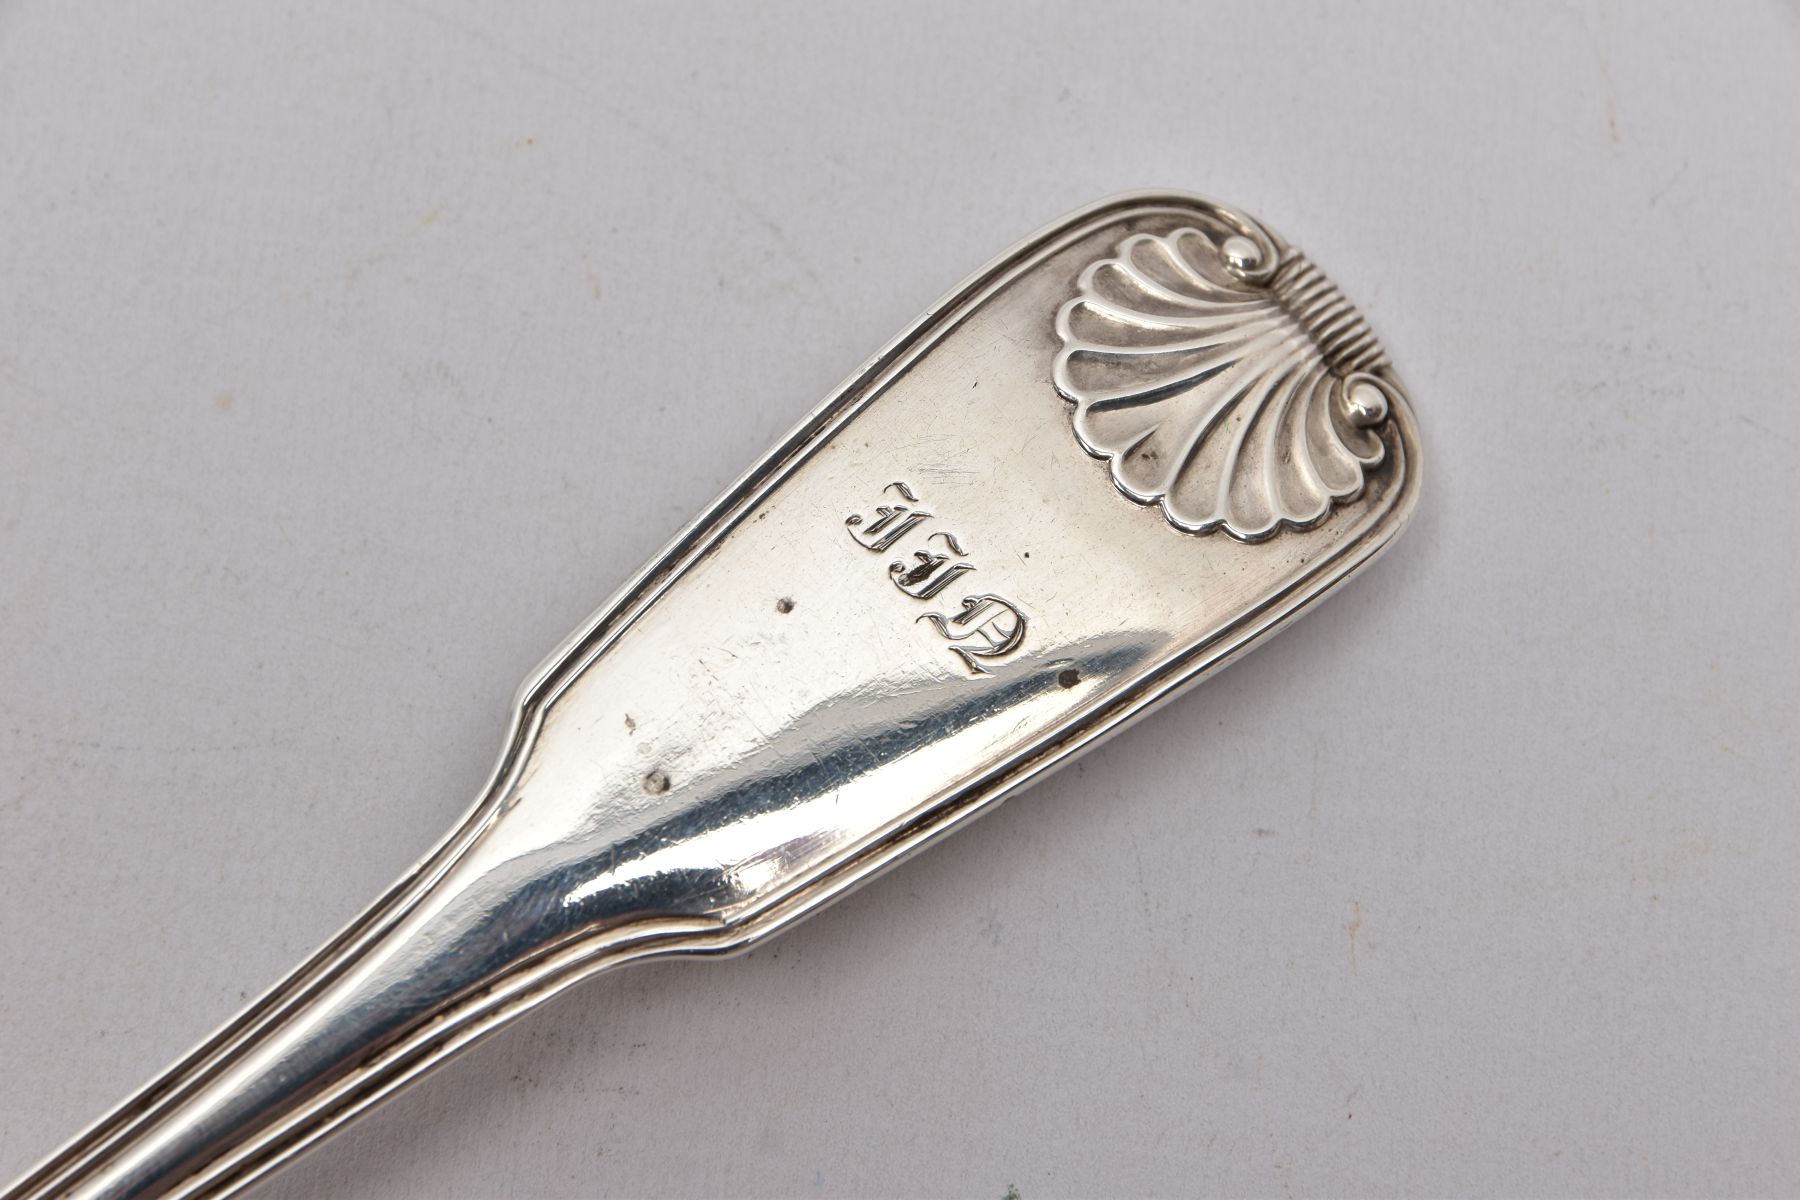 AN EARLY VICTORIAN LARGE SILVER SERVING SPOON, kings pattern design with a reeded rim, engraved - Image 2 of 4